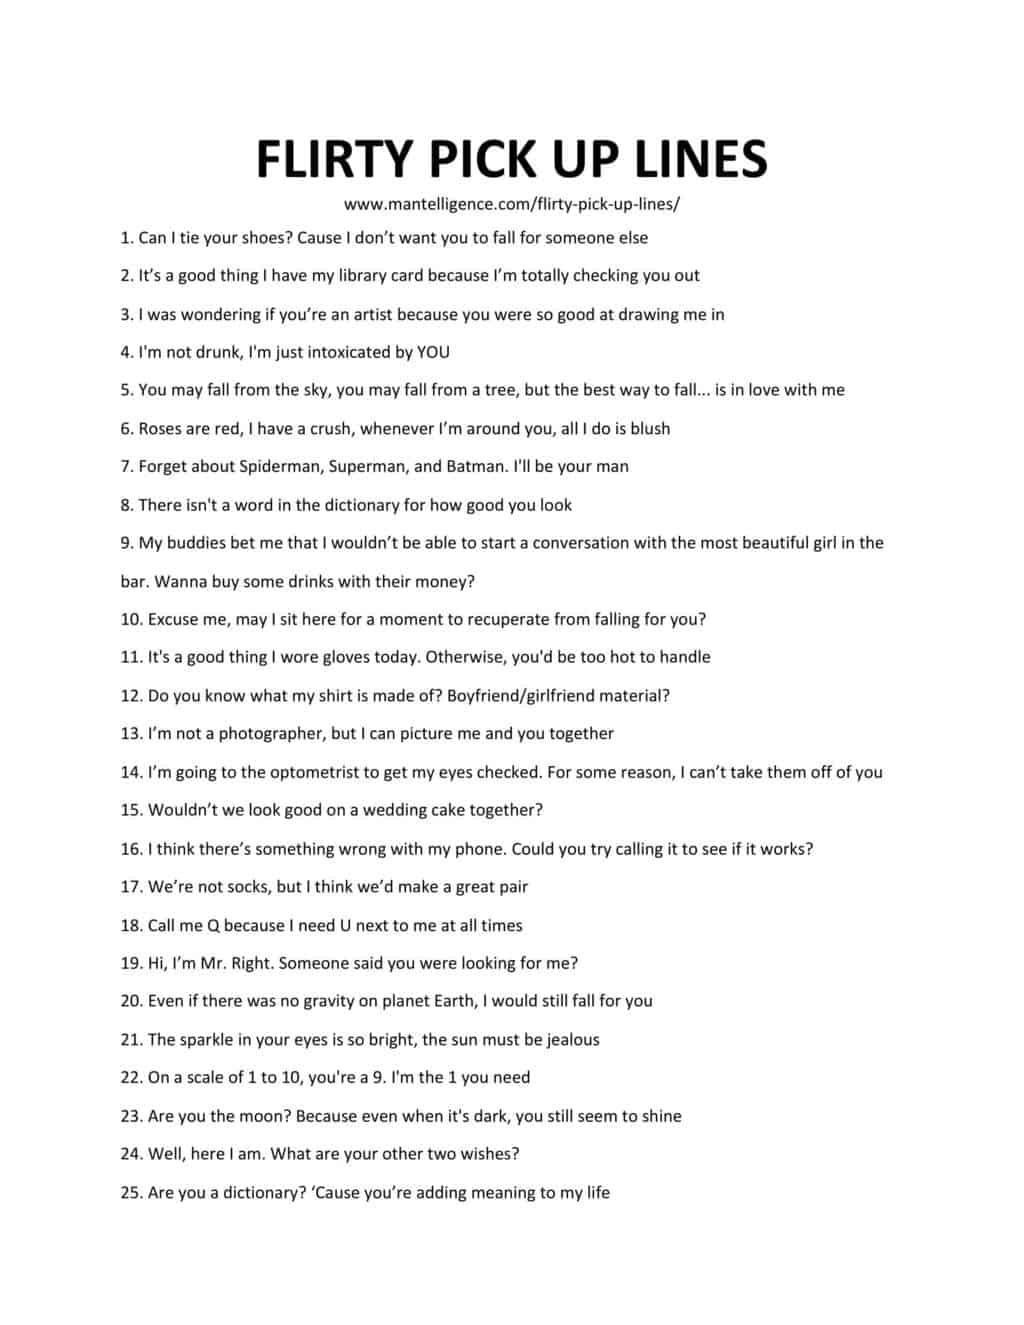 Downloadable List of Pick Up Lines